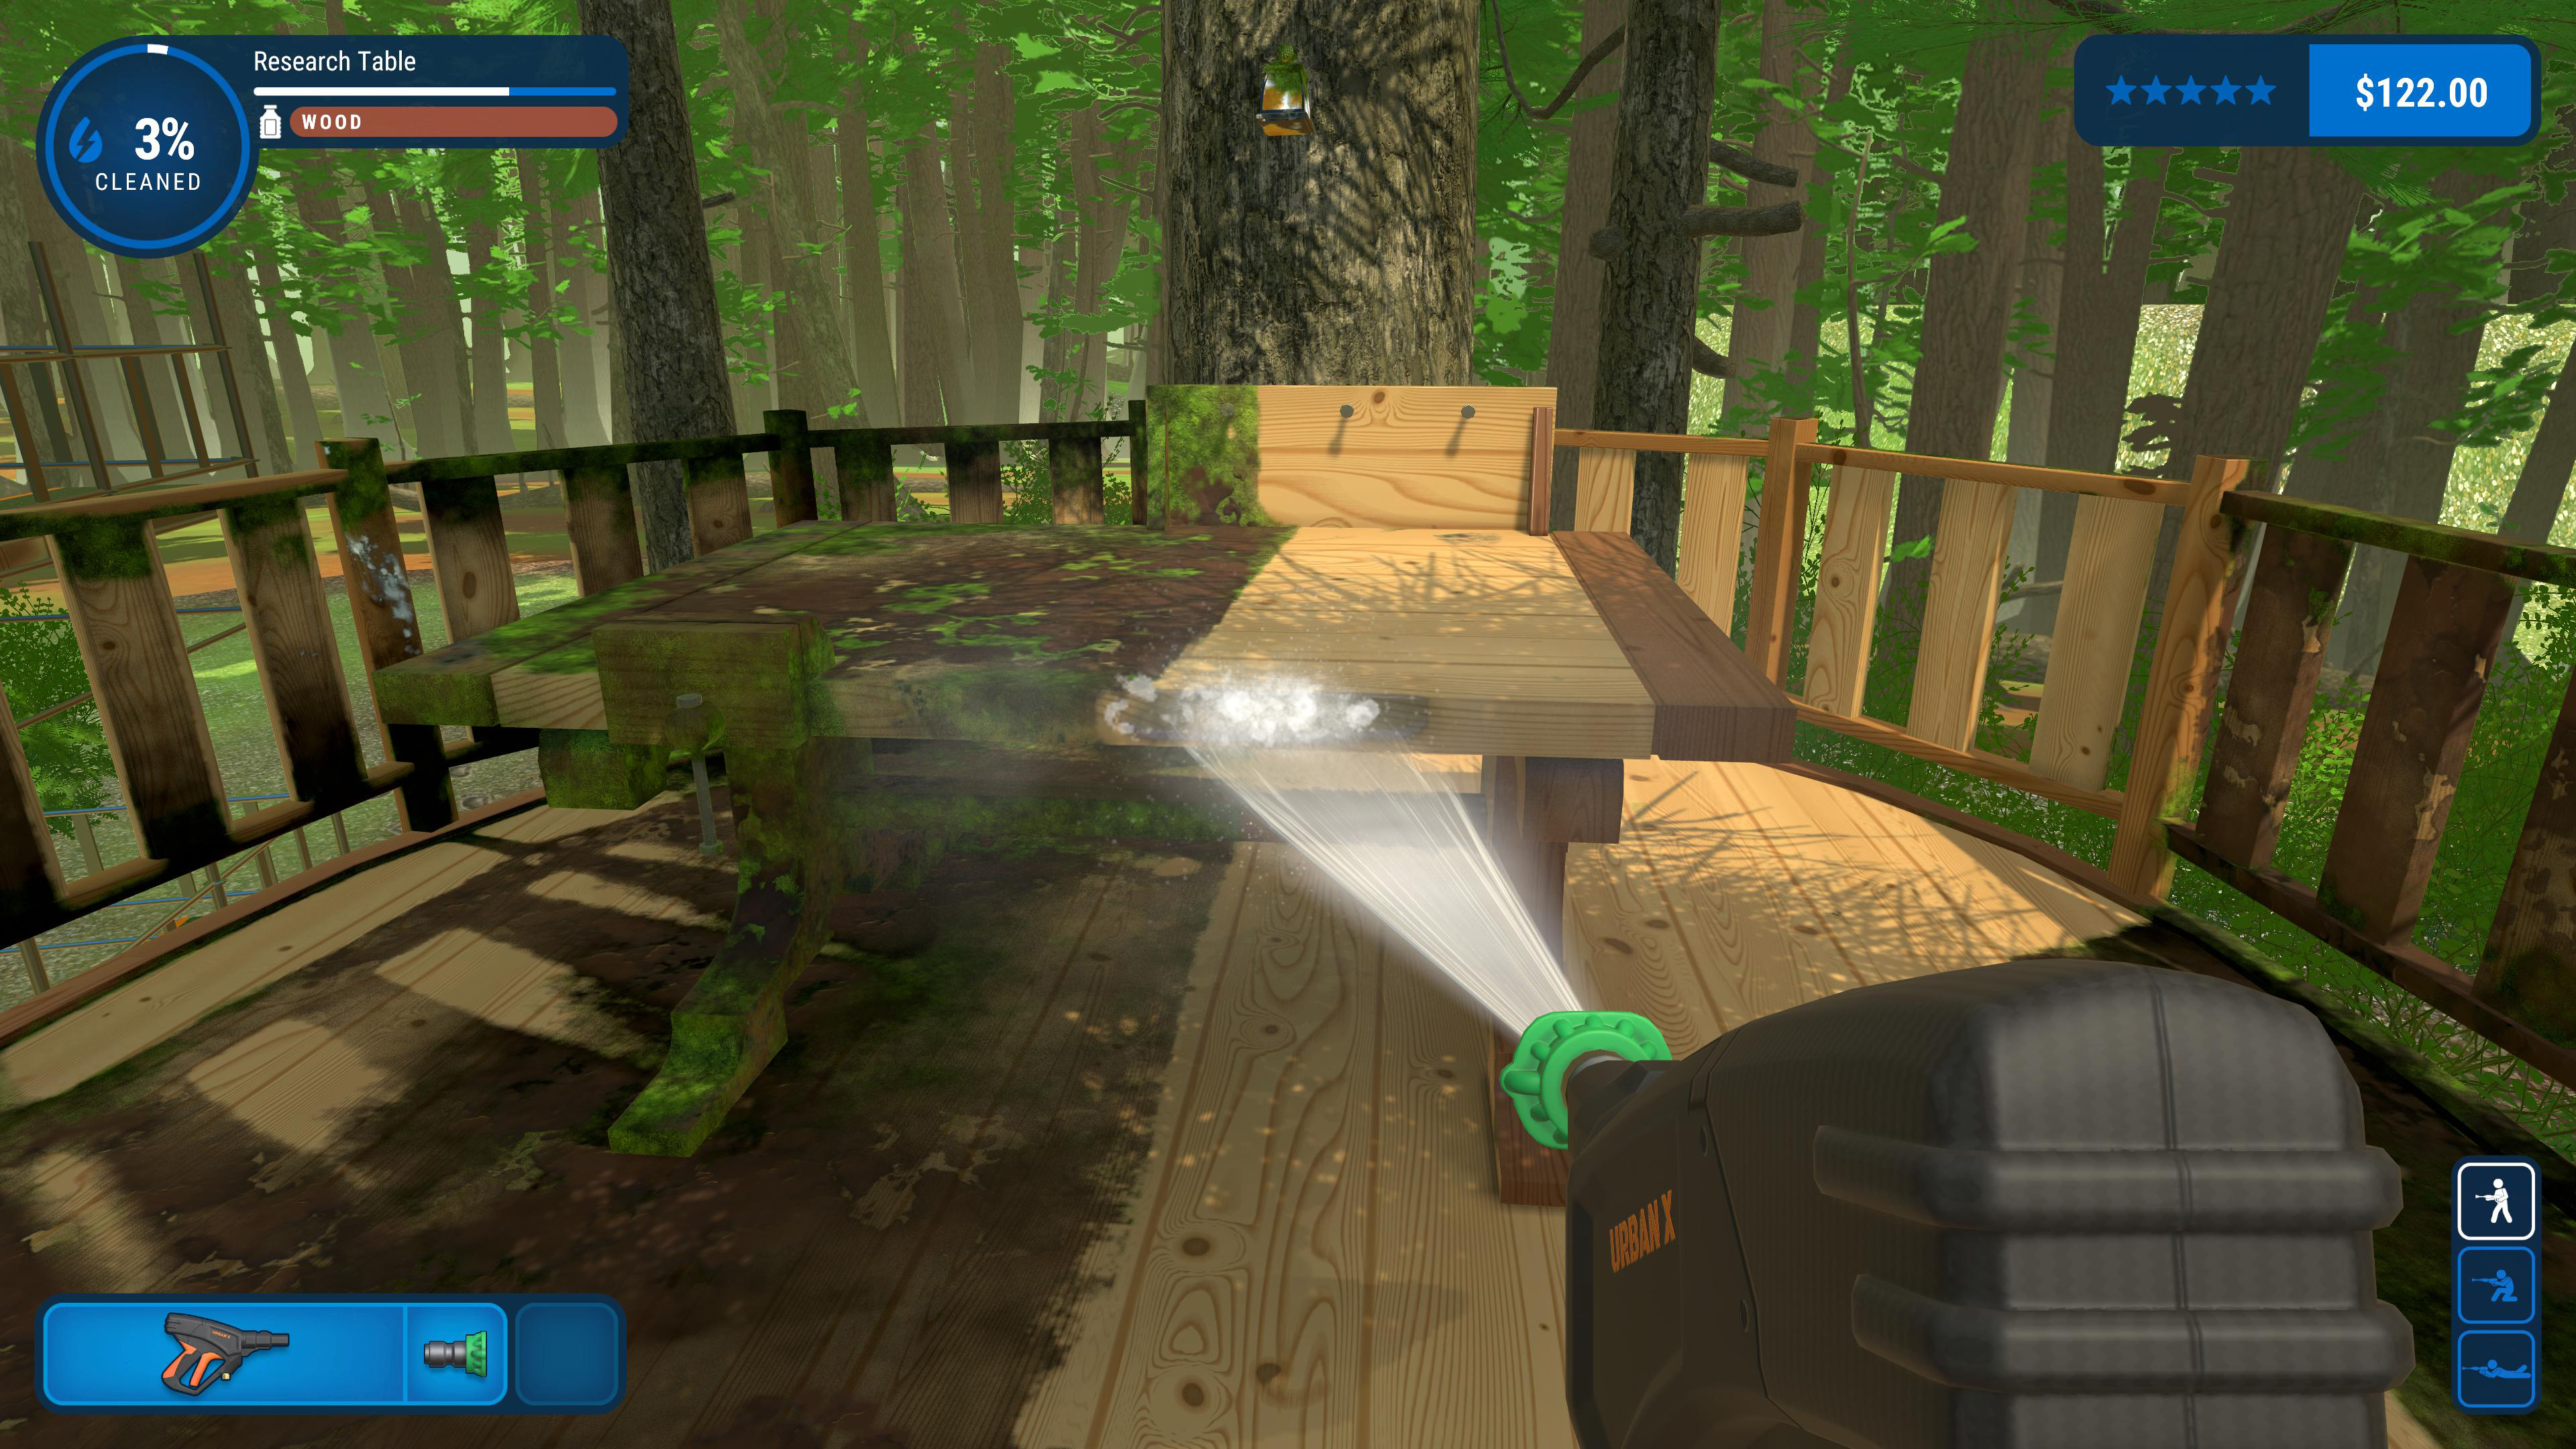 PowerWash Simulator to get Aim Mode for accessibility in future update